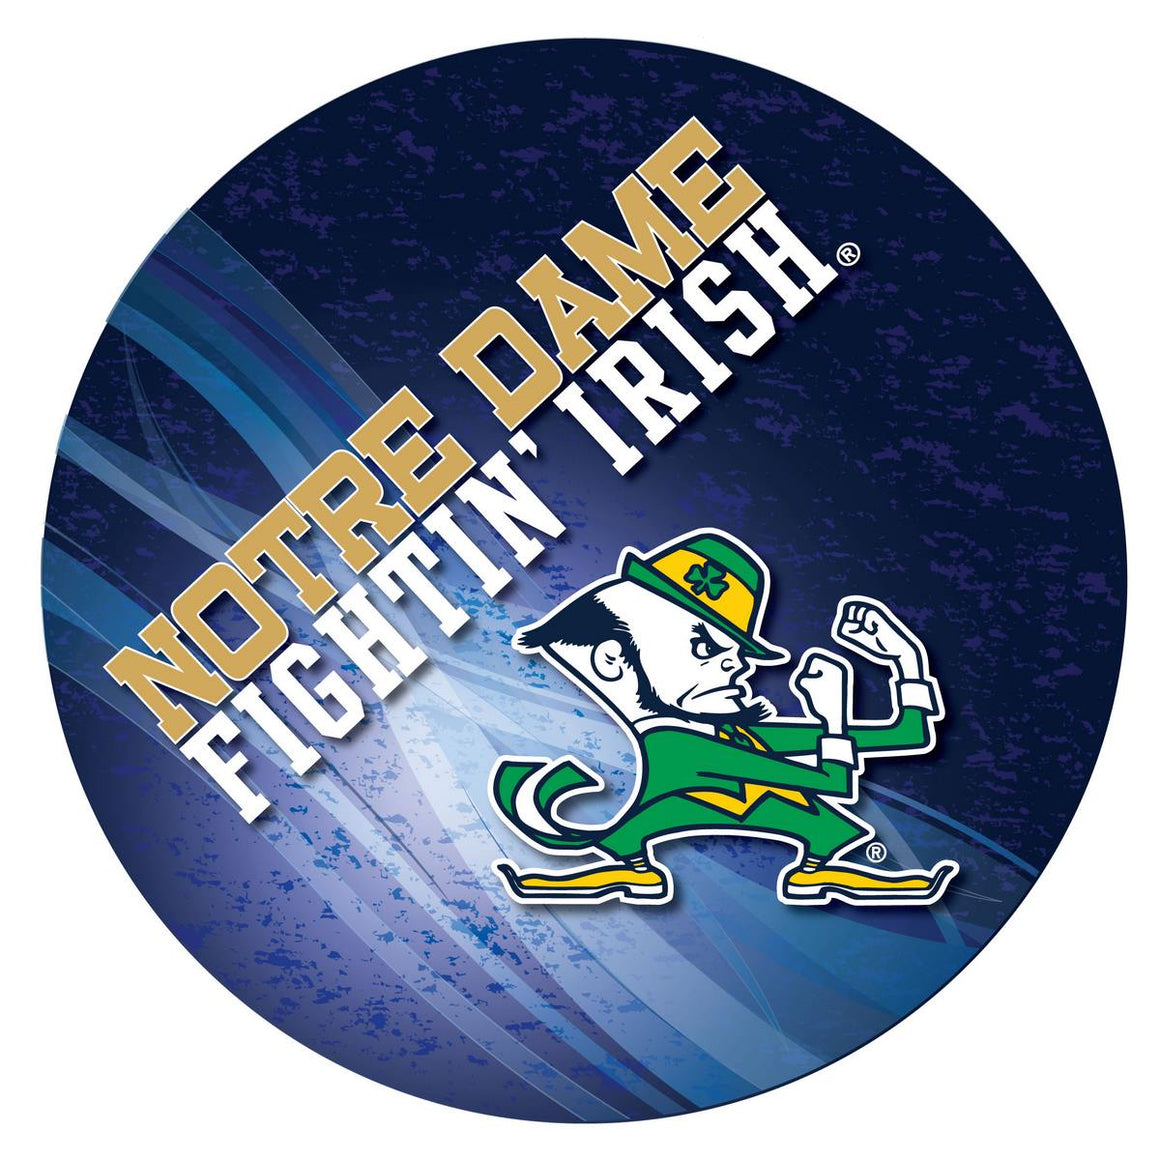 Notre Dame Fighting Irish Logo LED Lighted Pub Table - Man Cave Boutique